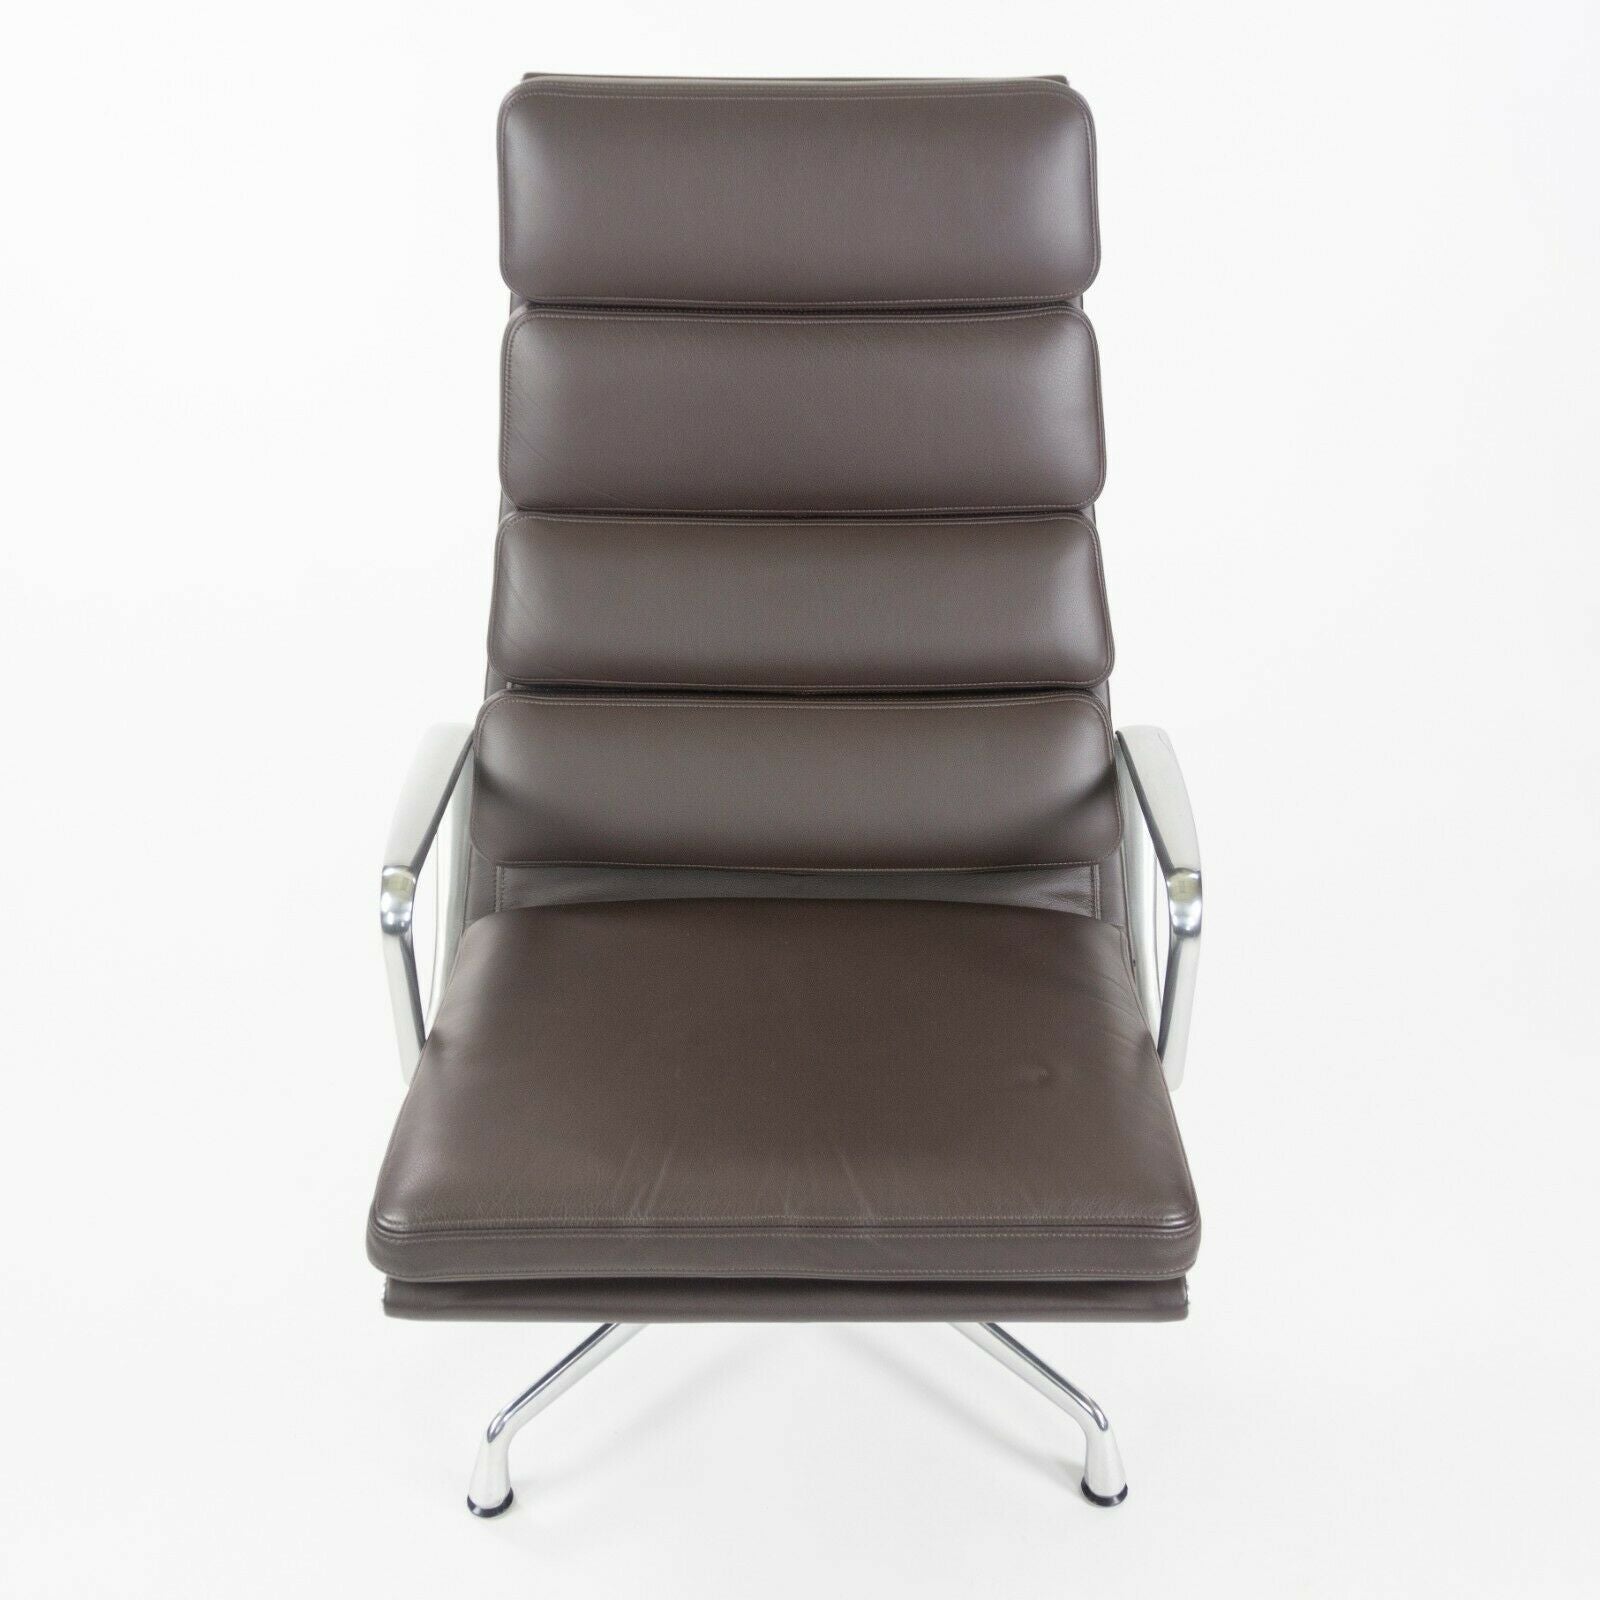 SOLD 2014 Eames Herman Miller Espresso MCL Soft Pad Aluminum Group Lounge Chair 4-Pad